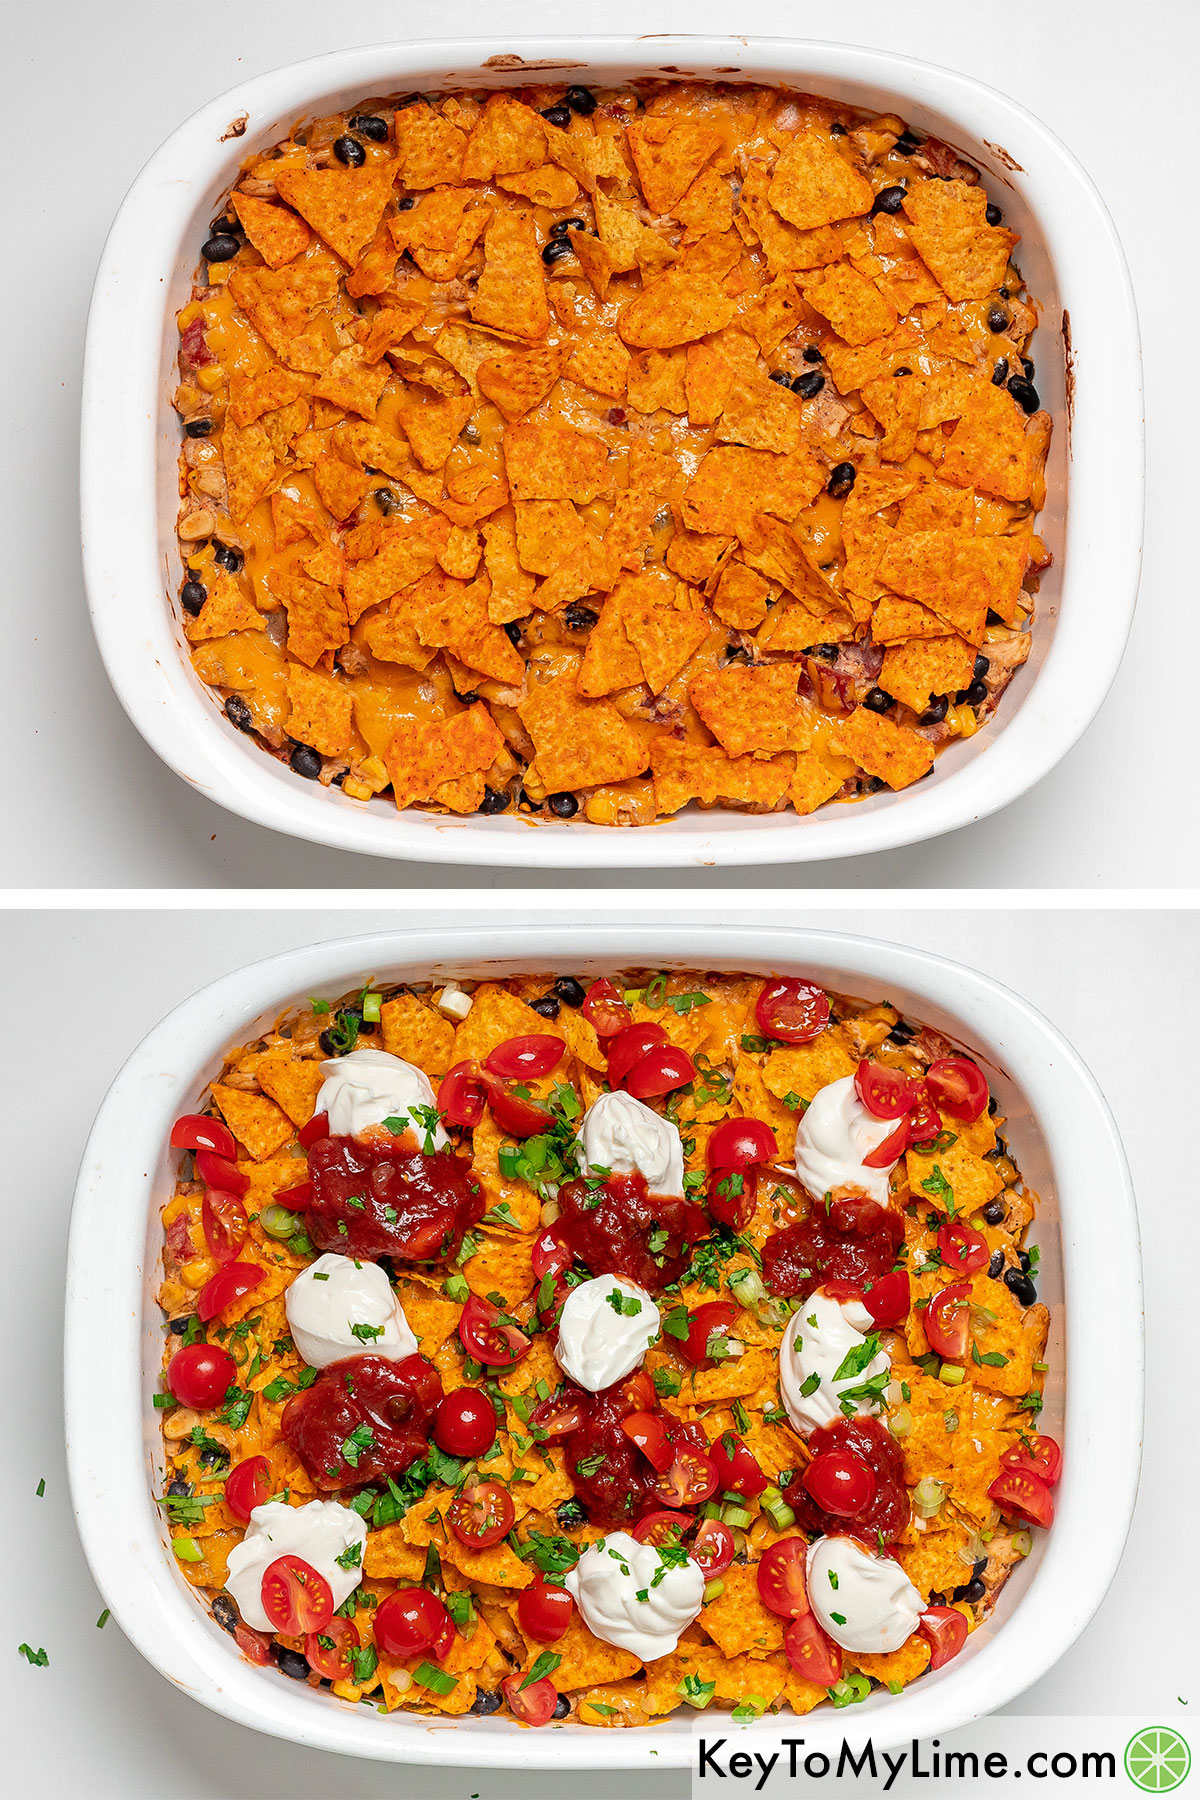 Topping with another layer of doritos then dolloping sour cream, salsa and fresh vegetables.